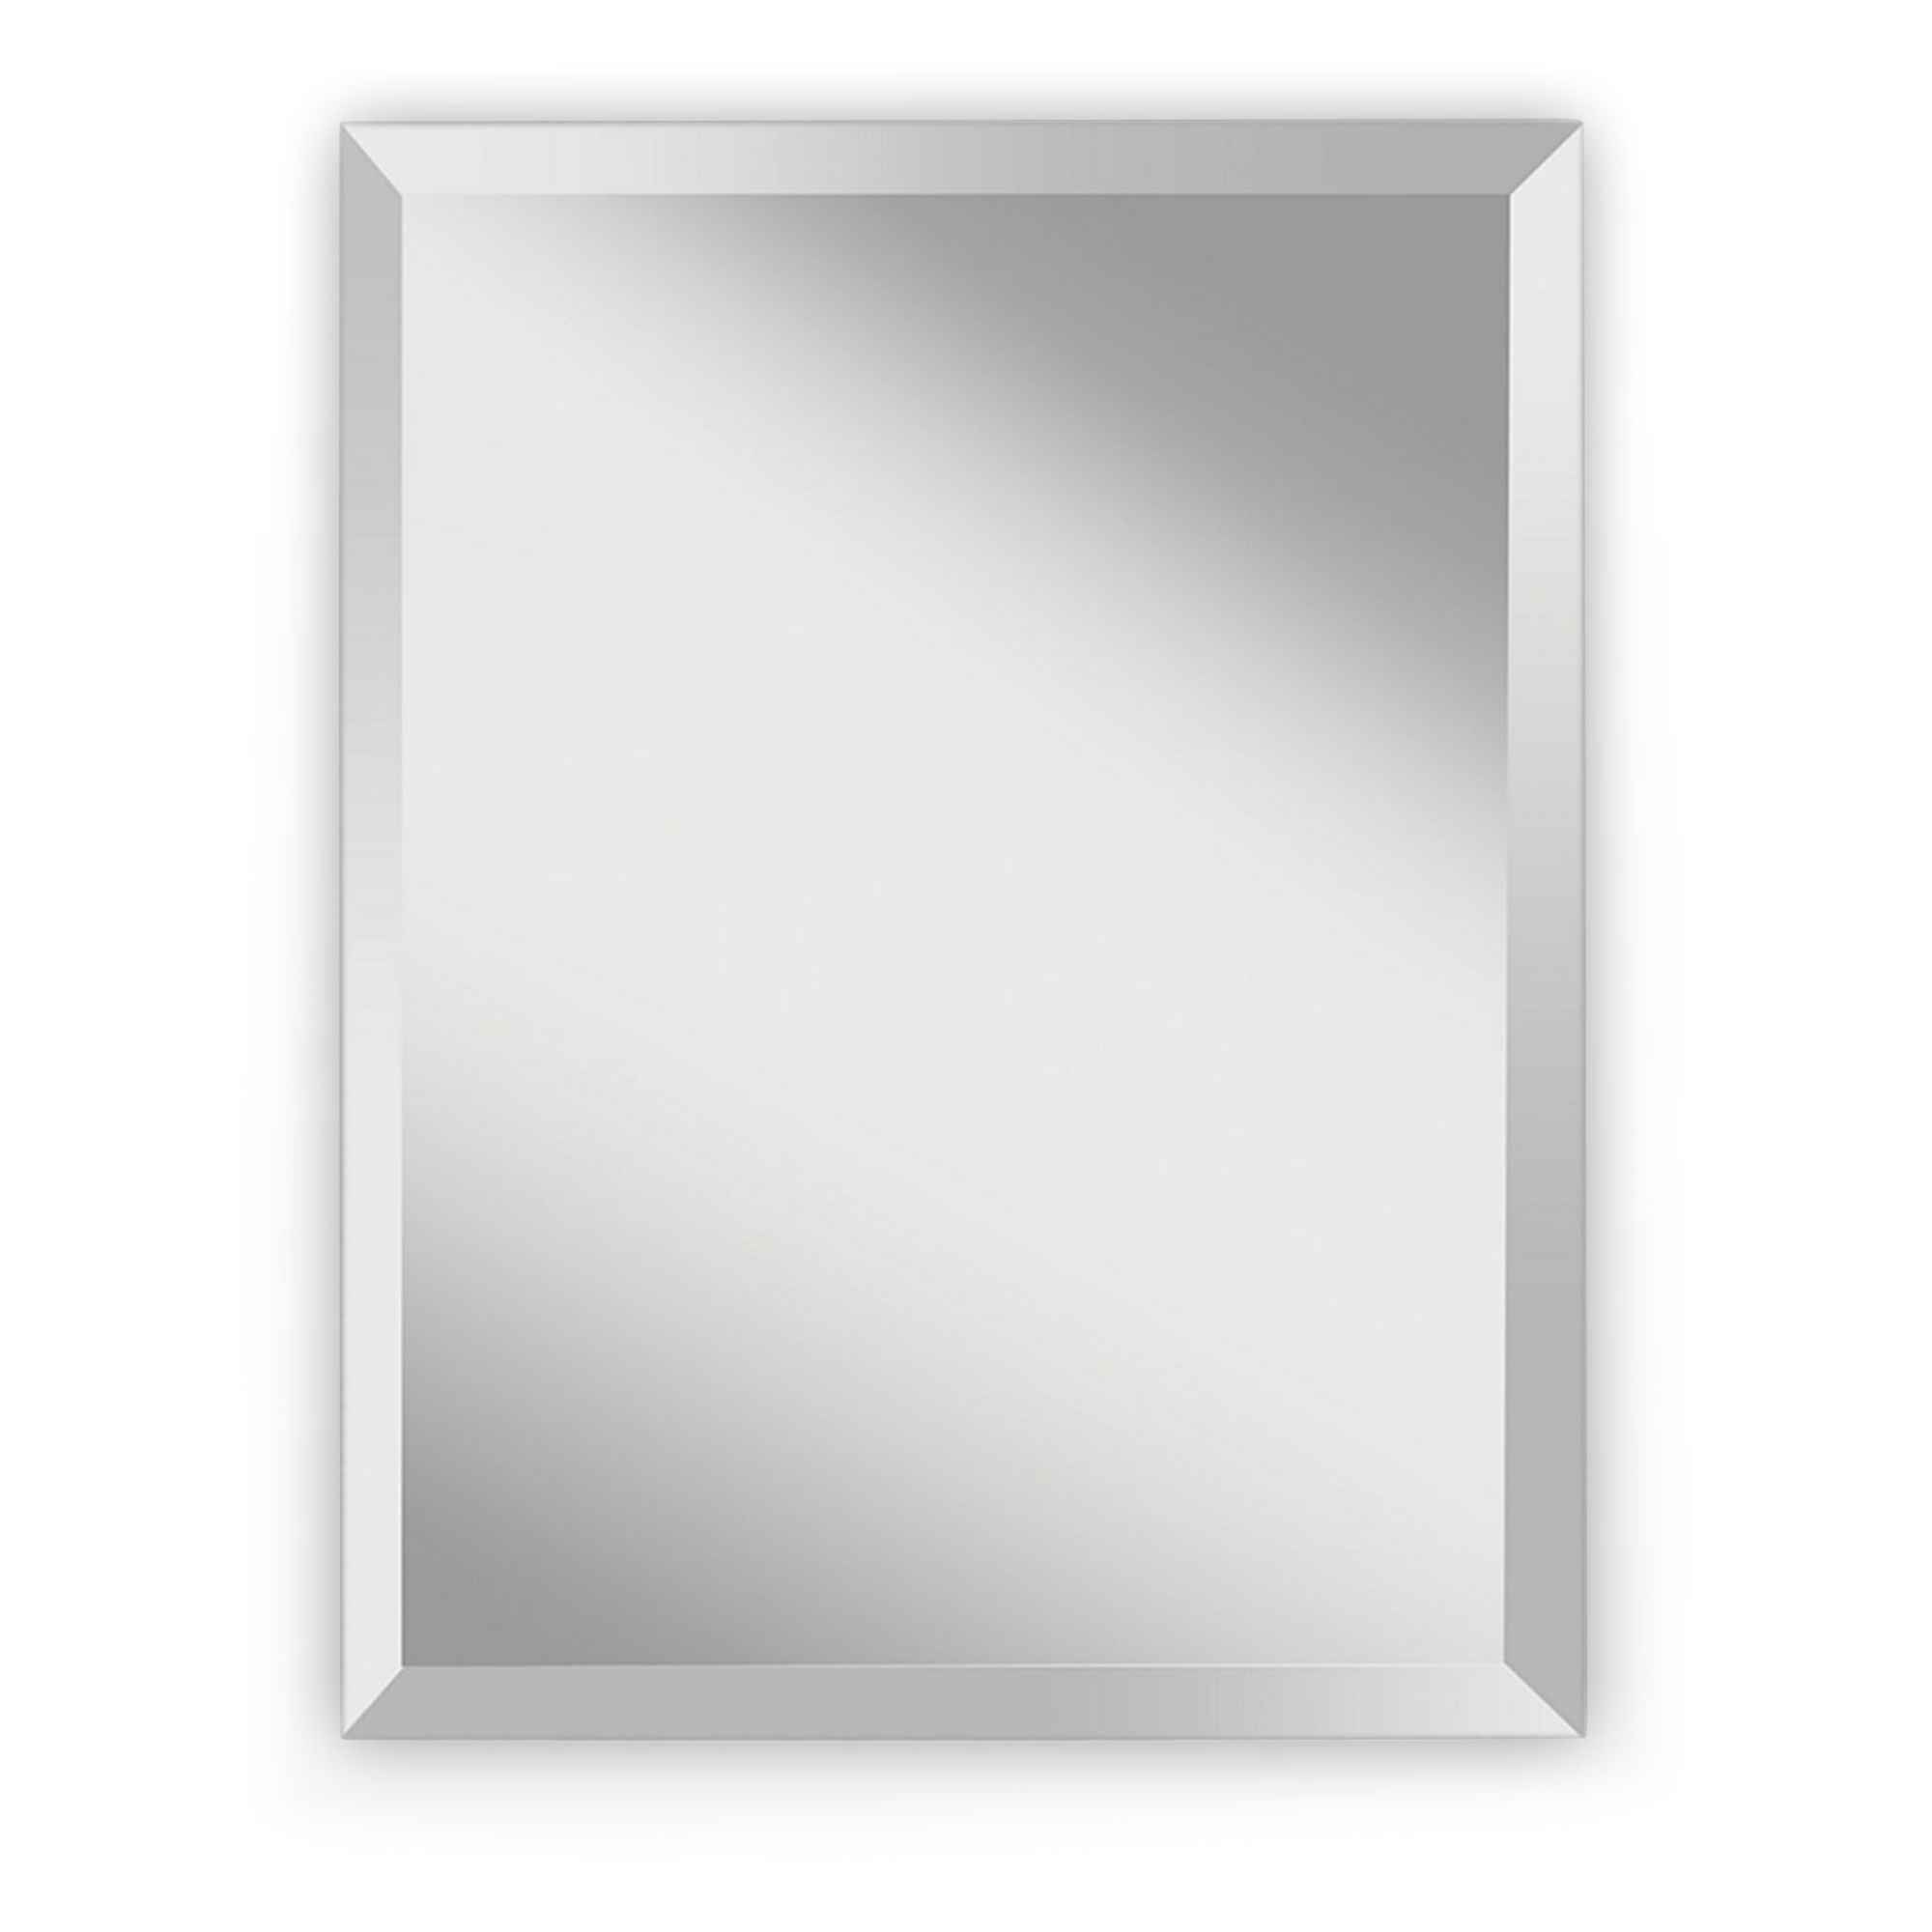 A sleek, frameless, contemporary mirror with a rectangular shape and a generously bevelled edge.